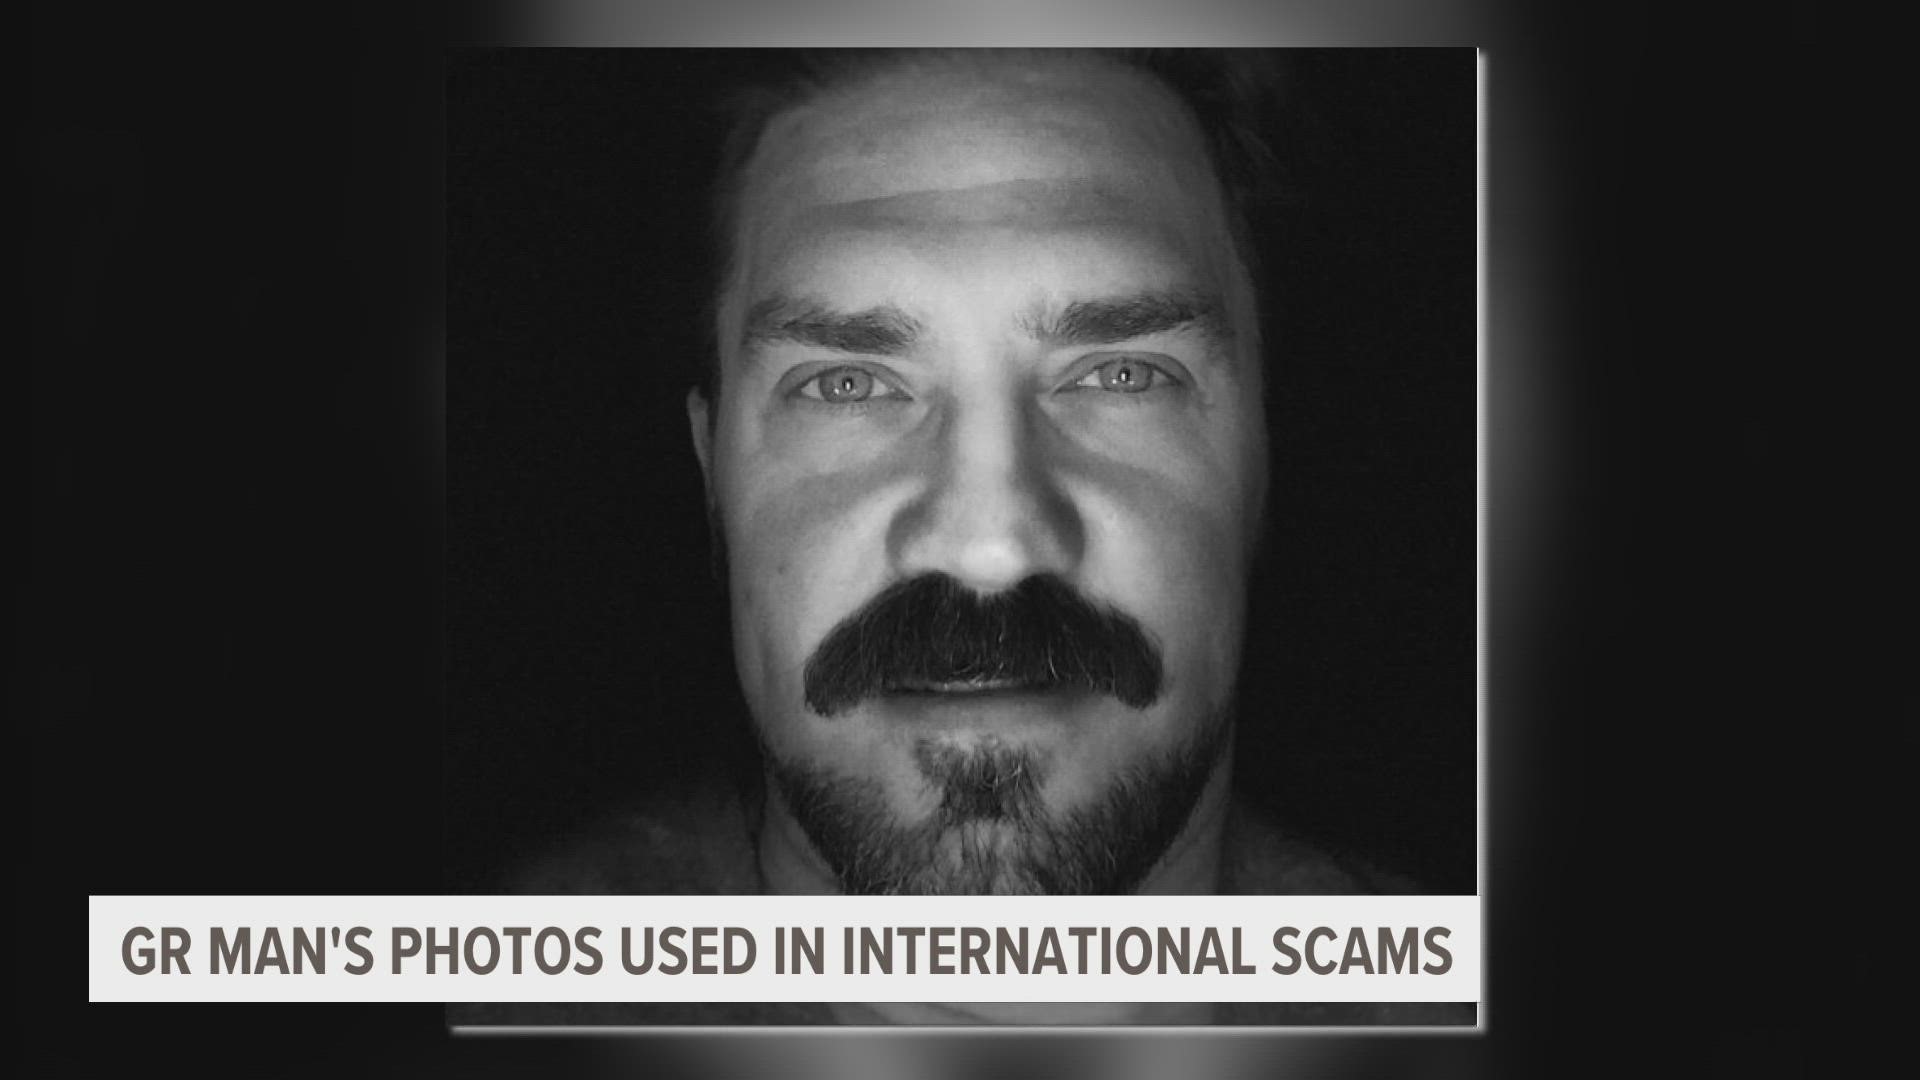 A Grand Rapids man has been caught up in a romance scam after his photos were uses by someone to catfish another.